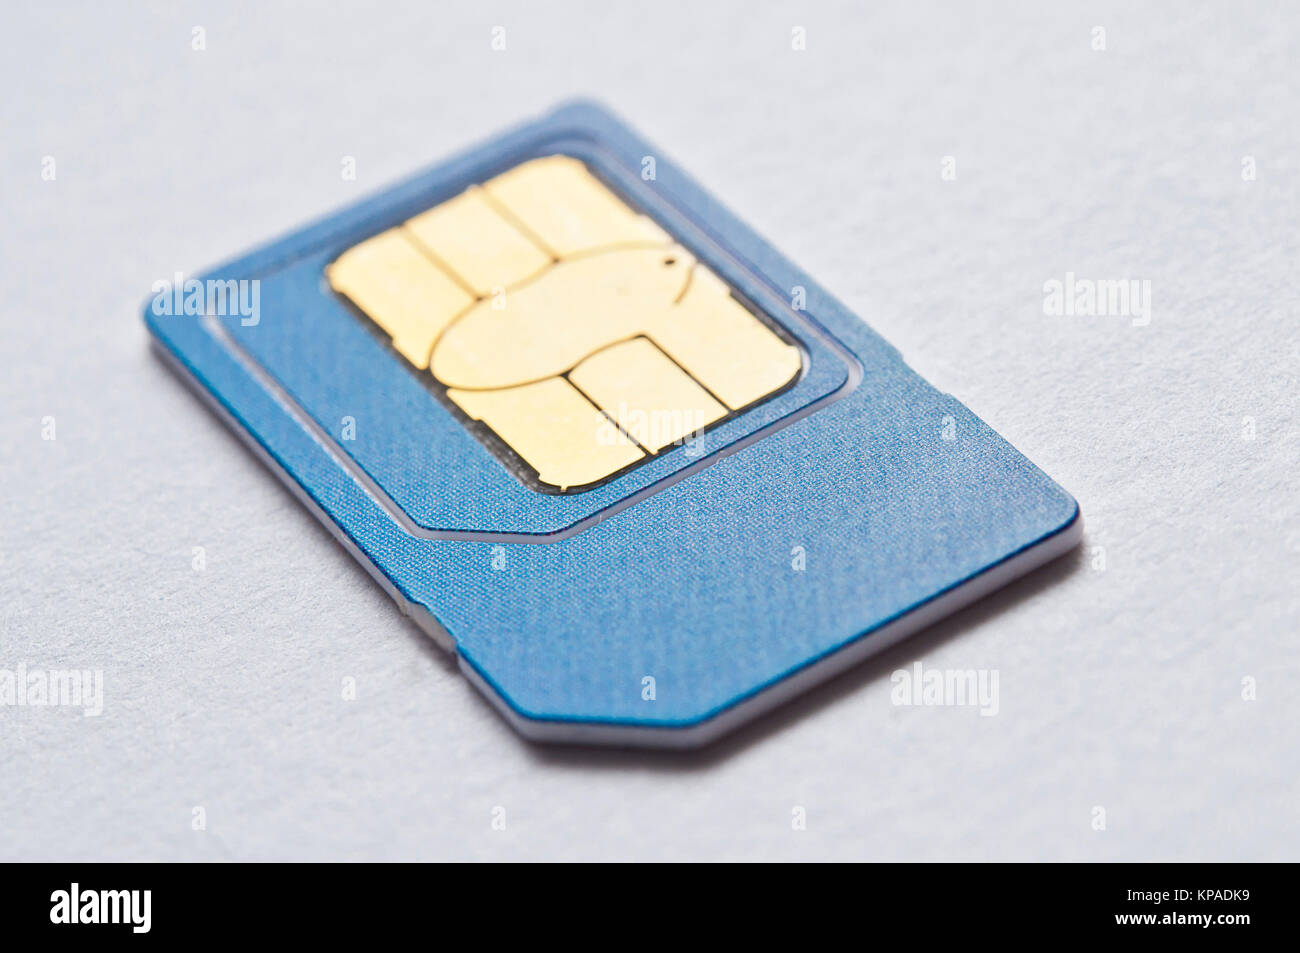 SIM card for mobile phone isolated Stock Photo